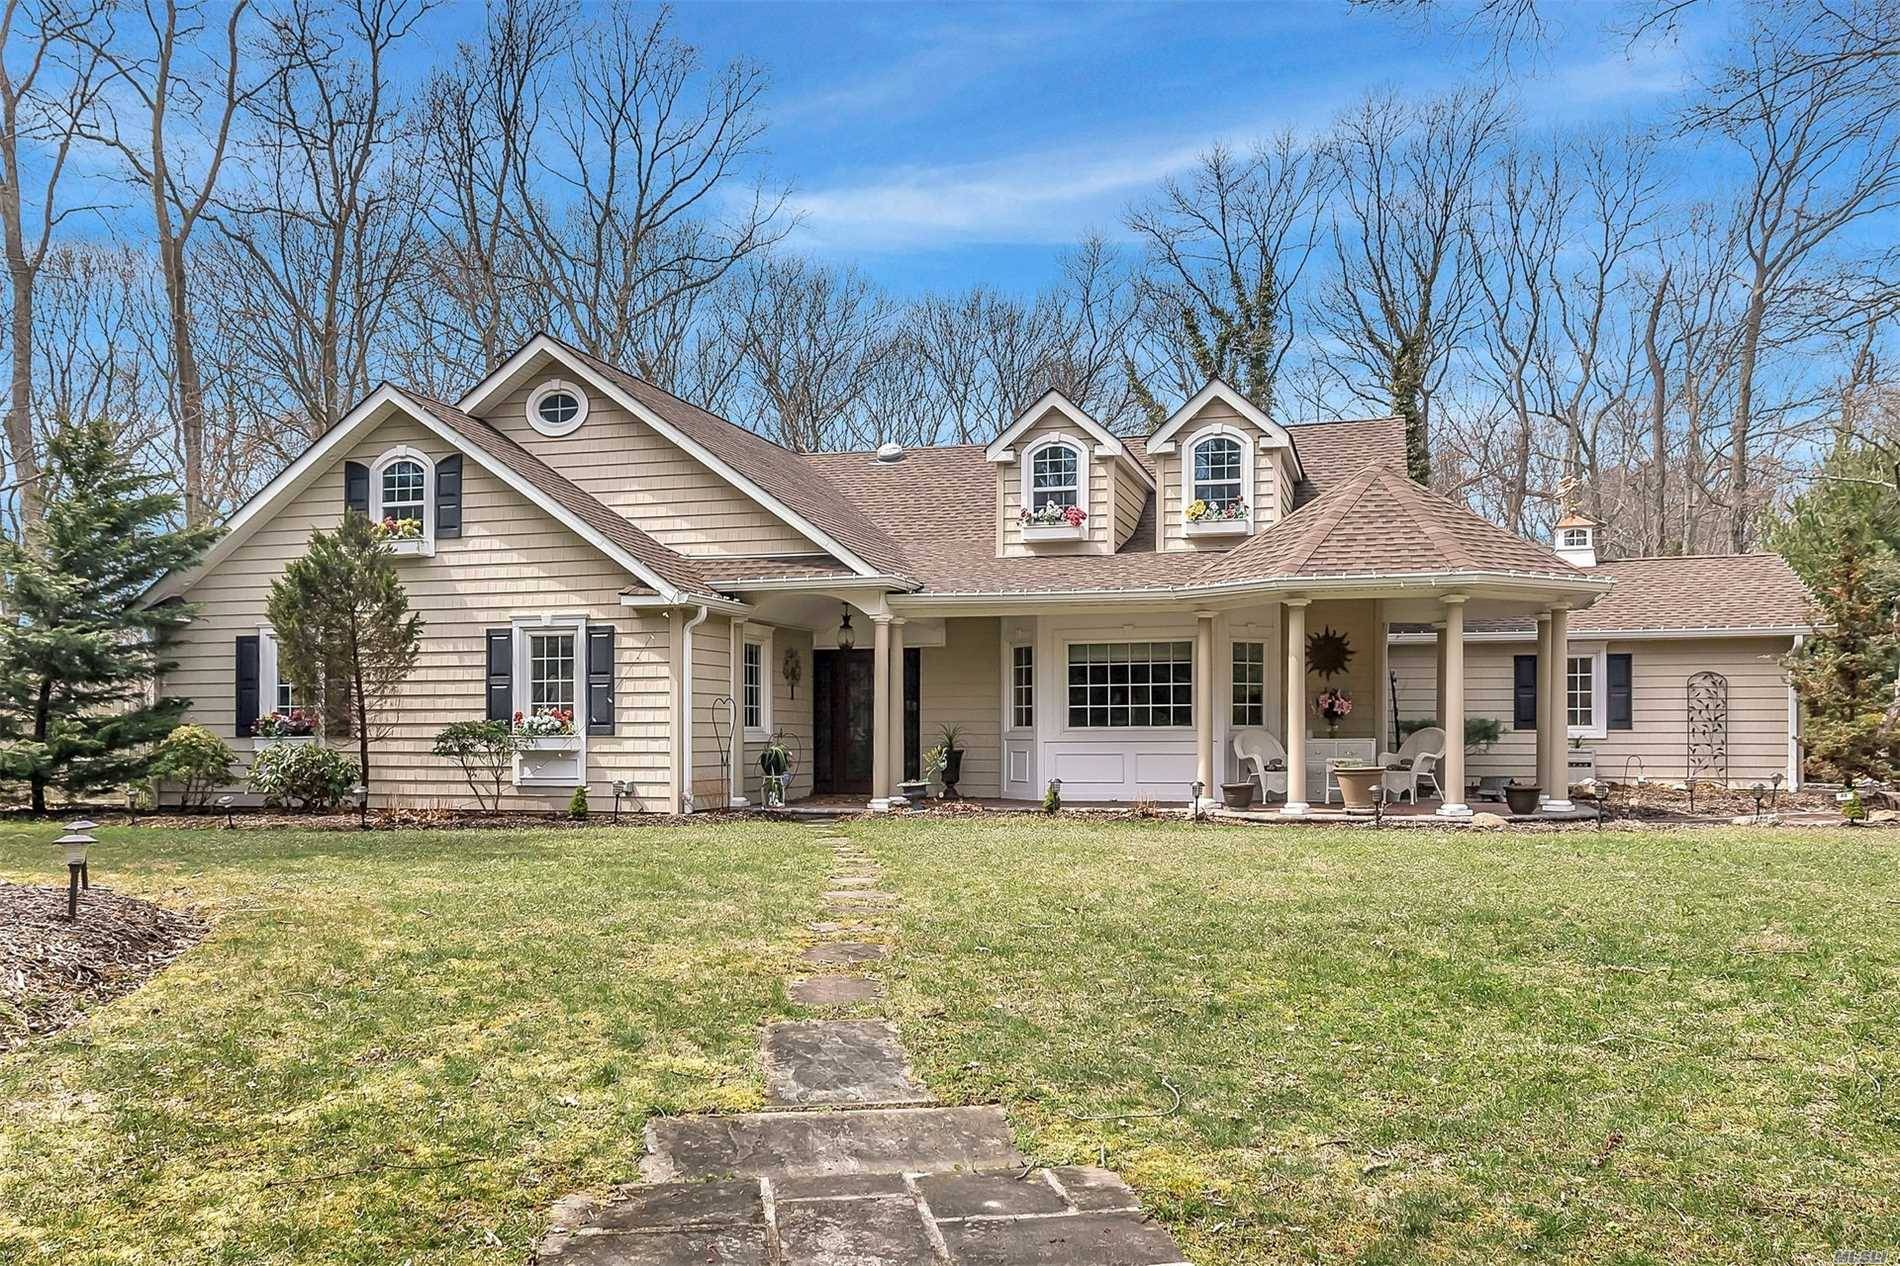 This spectacular Dix Hills Home in the Village Hill area over looks its picturesque surroundings.